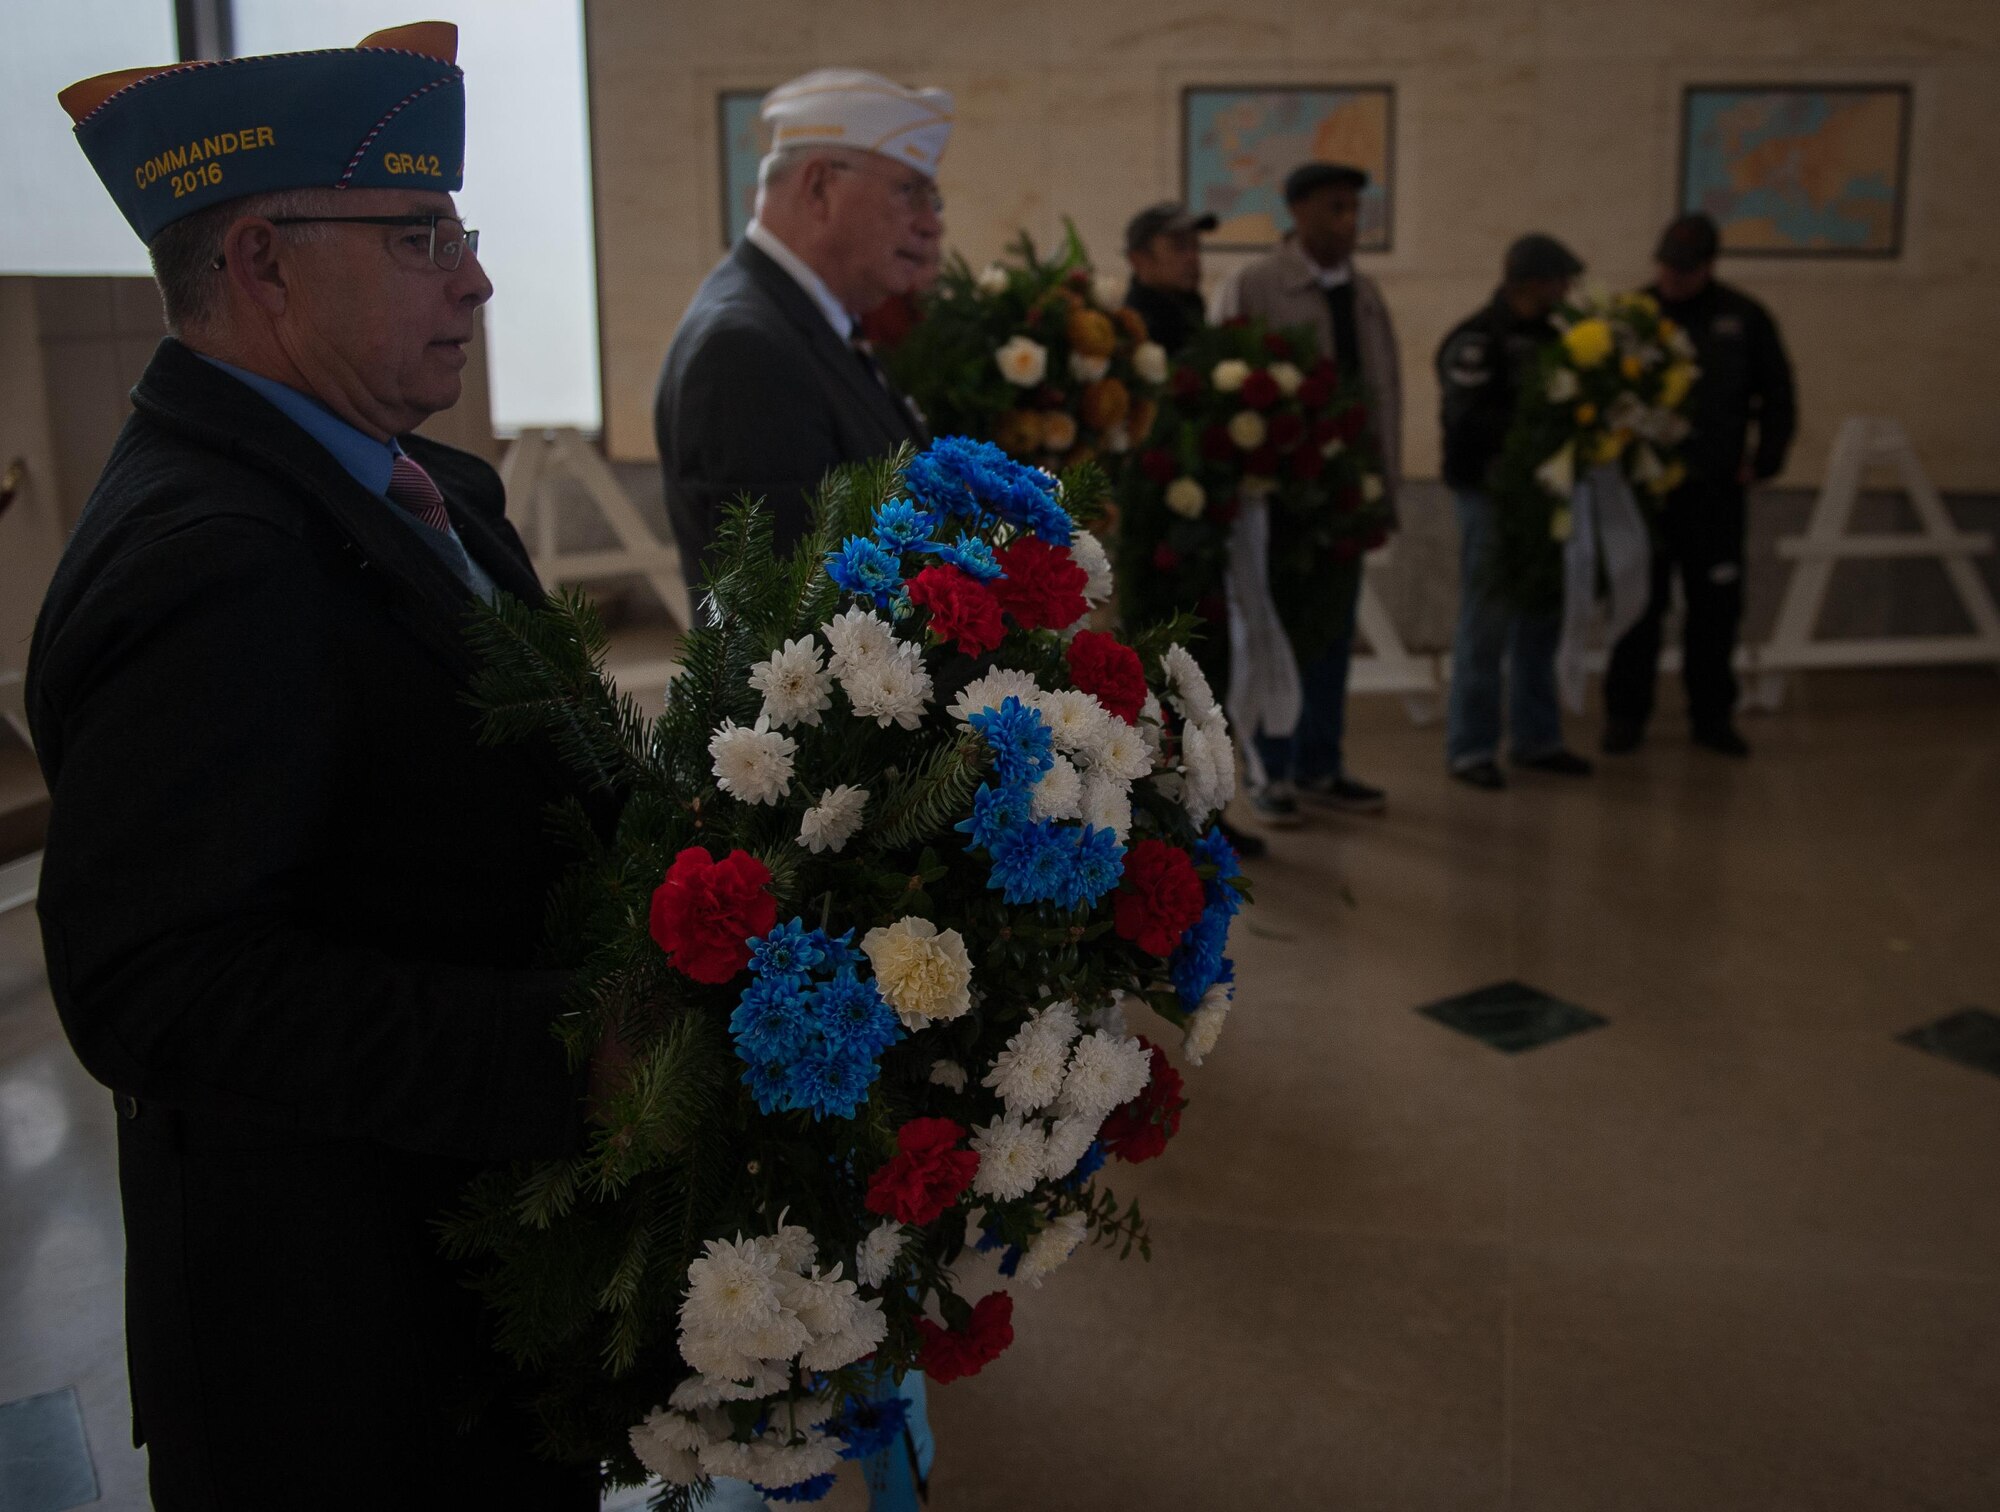 Representatives from several organizations visiting the Lorraine American Cemetery begin a wreath laying ceremony to honor the fallen war veterans Nov. 11, 2016, at St. Avold, France. Veteran’s Day is observed annually on November 11 and commemorates military veterans who currently serve or have served the U.S. armed forces, including those who gave the ultimate sacrifice. According to the DoD and Veterans Administration, since World War I, approximately 624,000 U.S. servicemembers have been killed in action battling in wars and conflicts. The Lorraine American Cemetery contains the buried remains of over 10,000 of them. It is the largest burial site of U.S. servicemembers in Europe. (U.S. Air Force photo by Airman 1st Class Lane T. Plummer)